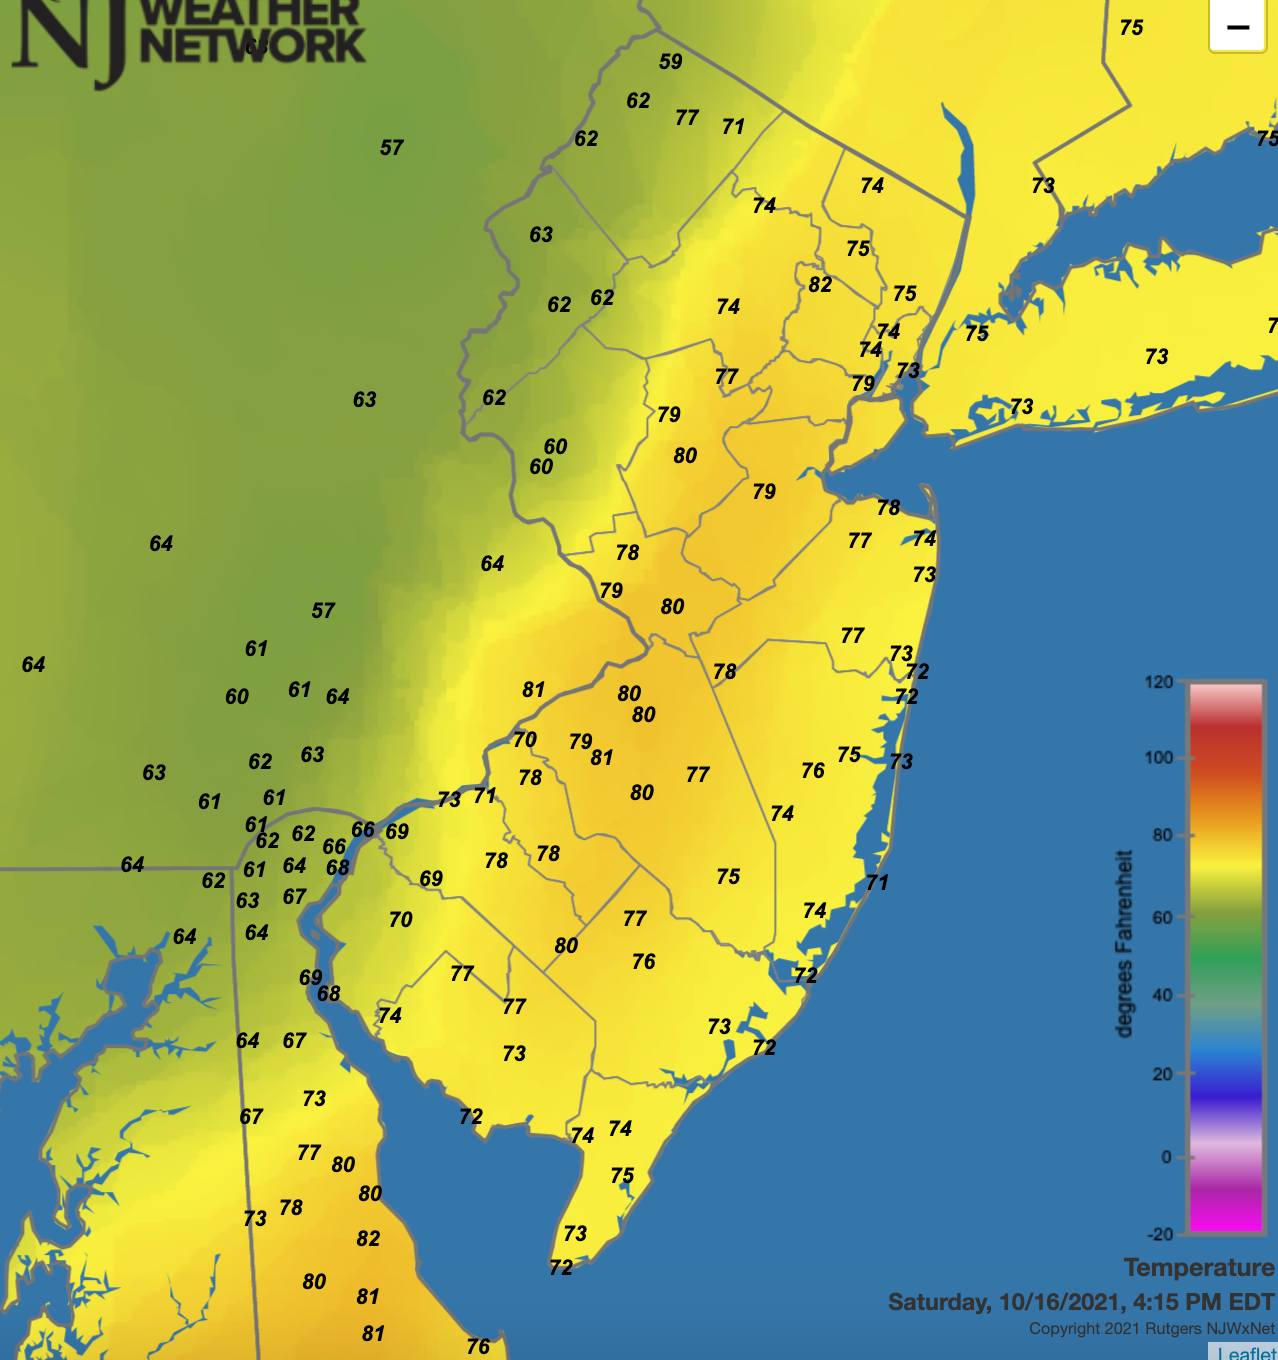 Temperatures across the region at 4:15 PM on October 16th based on data from NJWxNet, NWS, and DEOS weather stations.